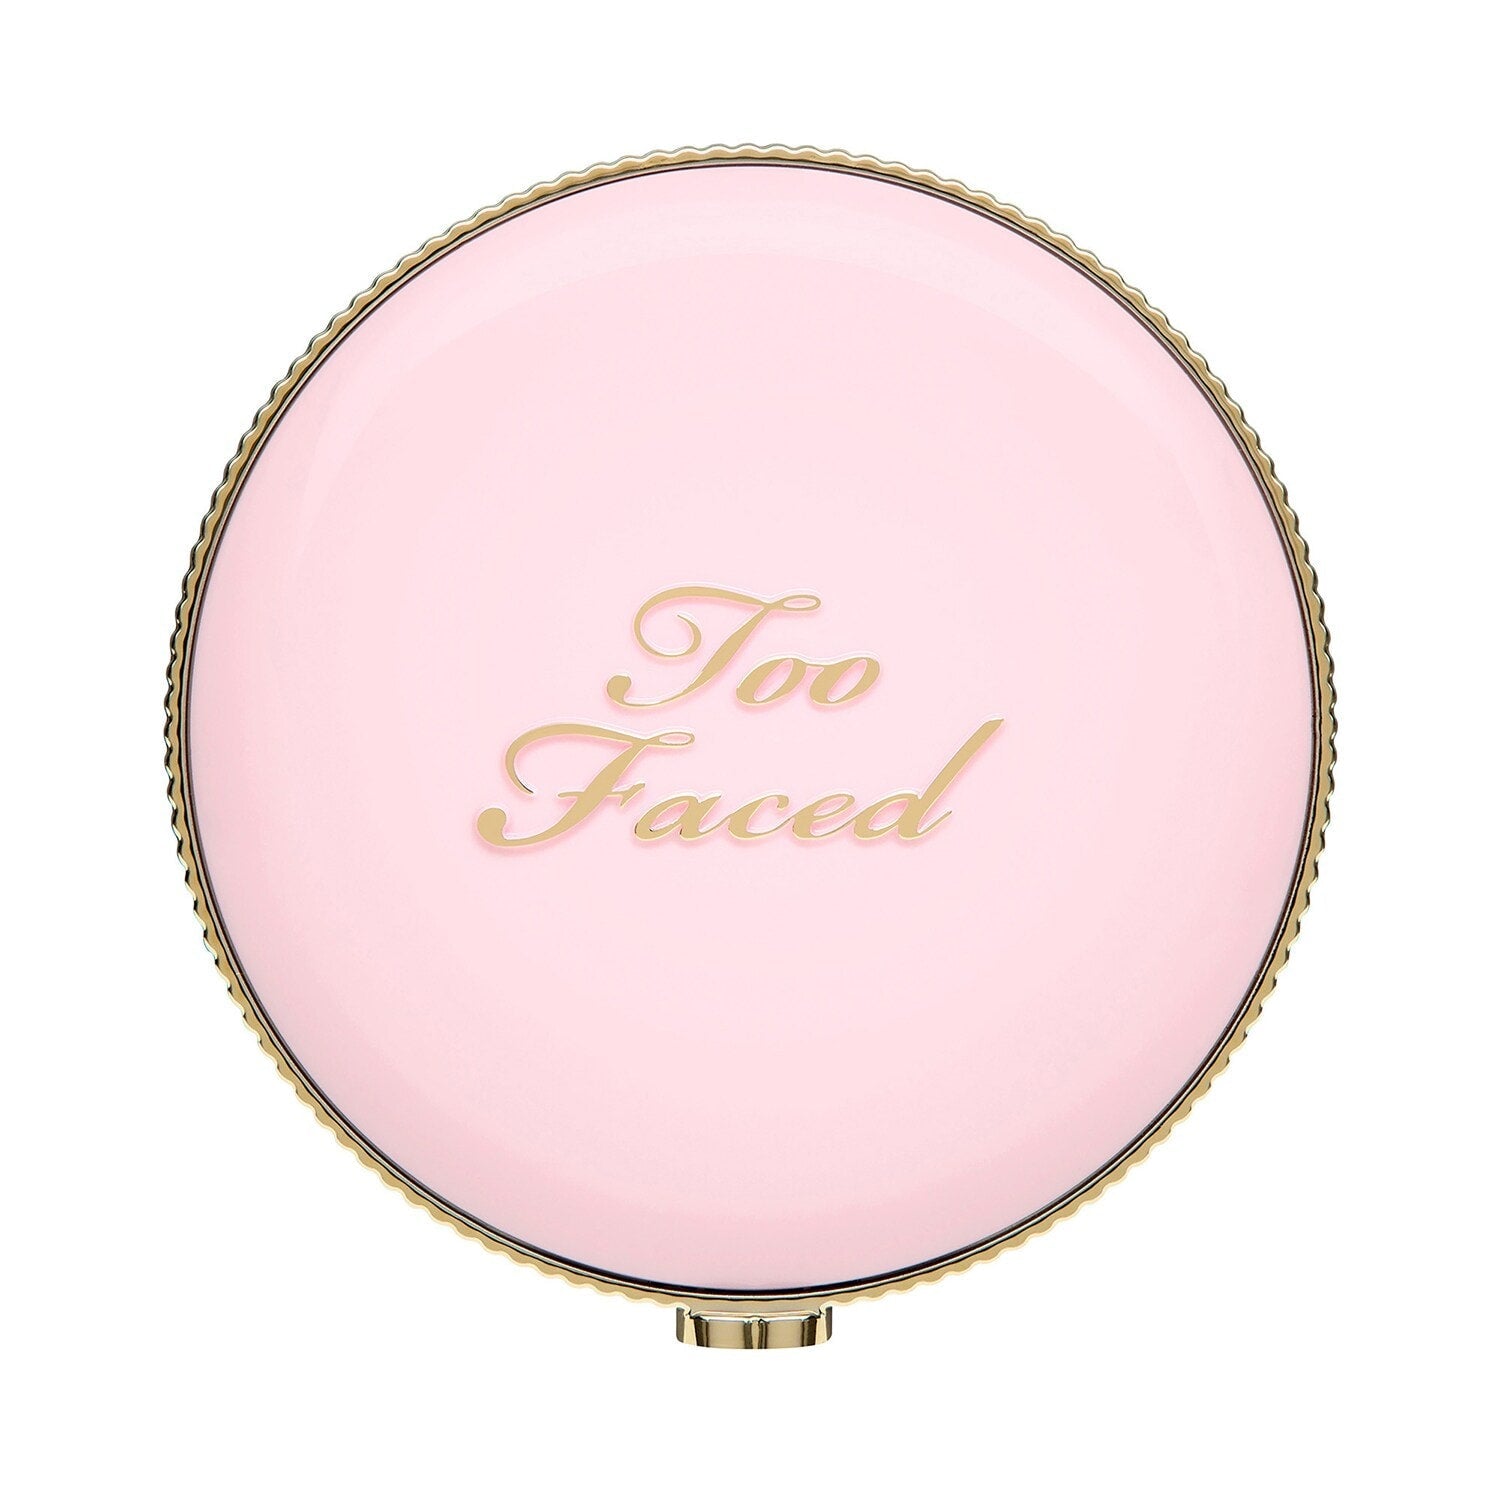 too-faced-moon-crush-highlighter-m